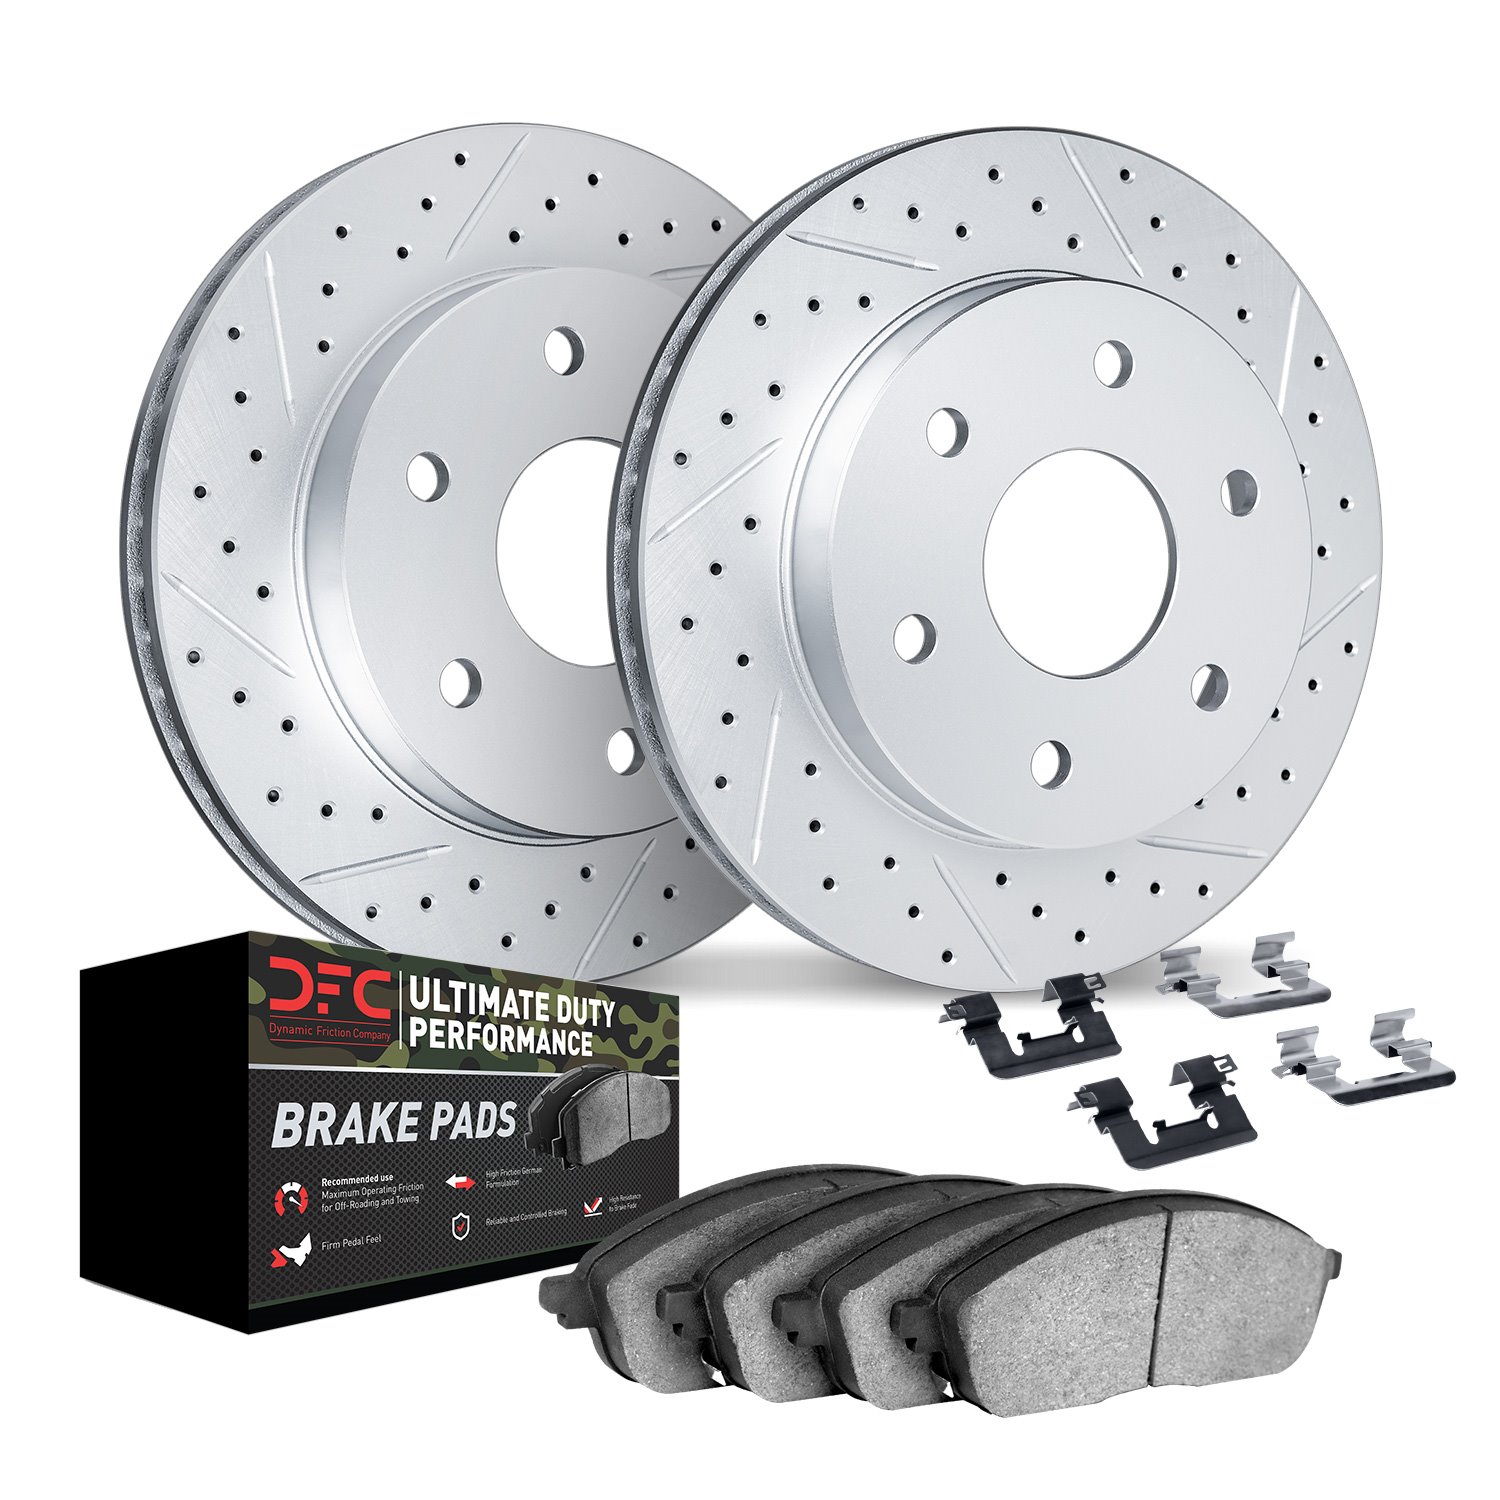 2412-54049 Geoperformance Drilled/Slotted Brake Rotors with Ultimate-Duty Brake Pads Kit & Hardware, 2004-2011 Ford/Lincoln/Merc